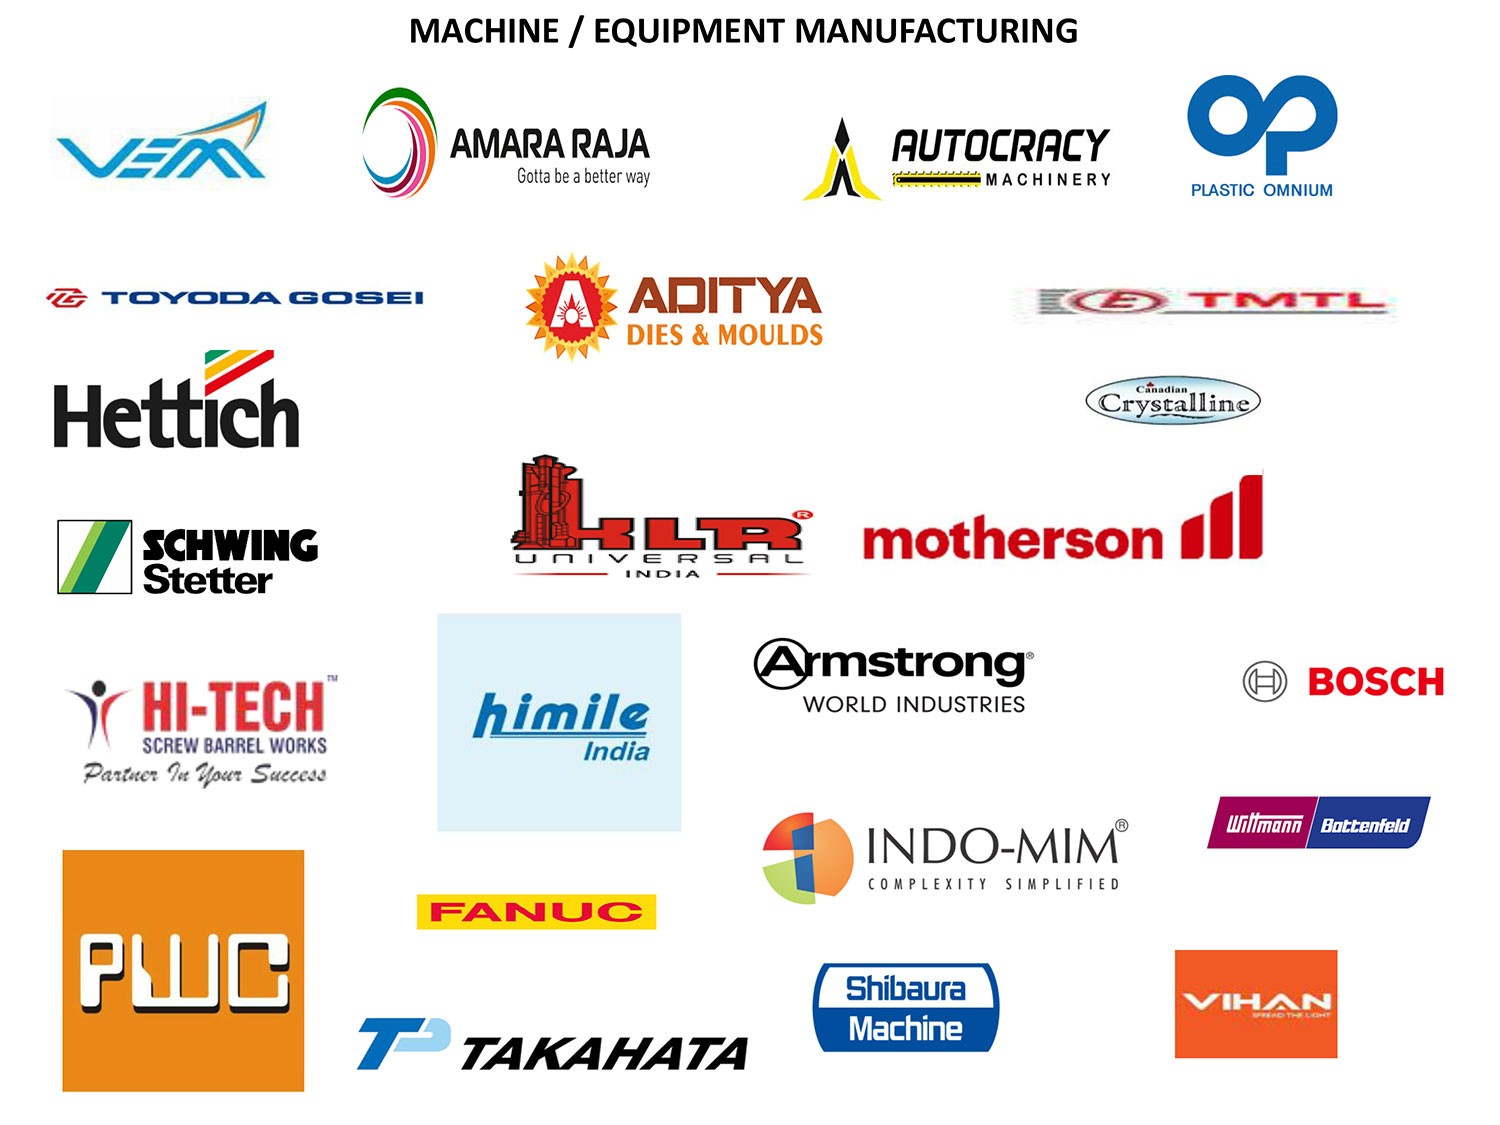 LEADING PLACEMENT PARTNERS - MACHINE / EQUIPMENT MANUFACTURING